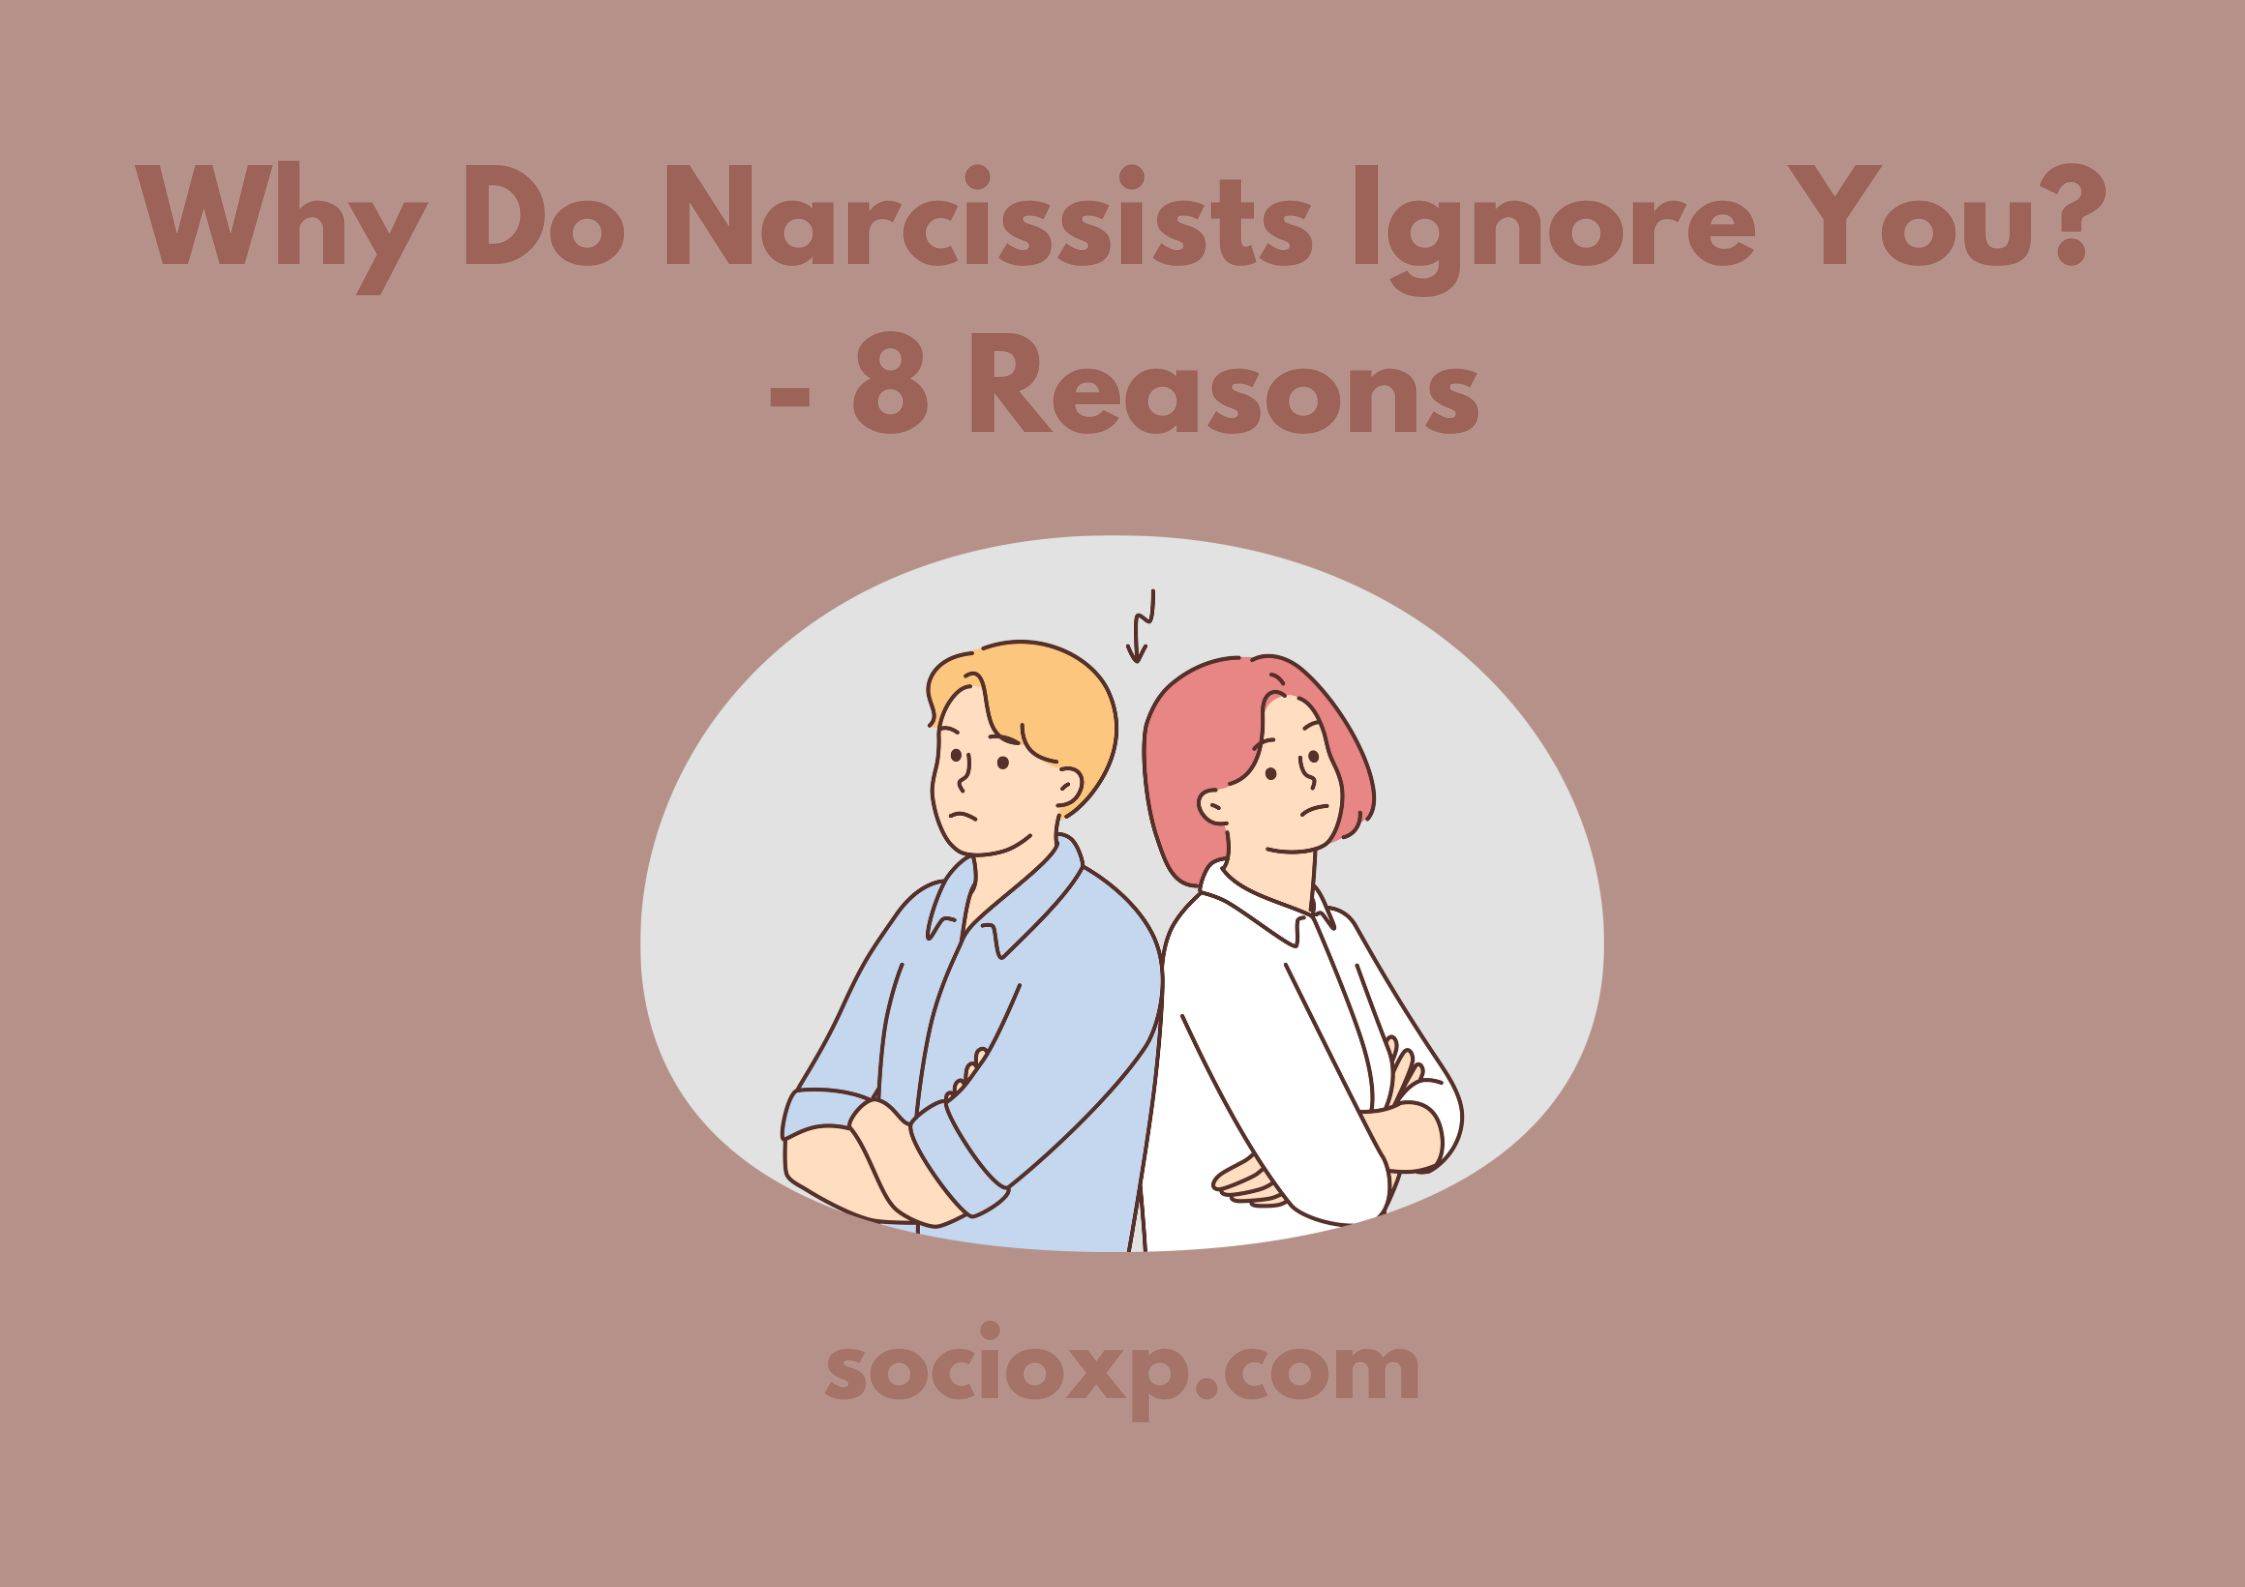 Why Do Narcissists Ignore You? - 8 Reasons